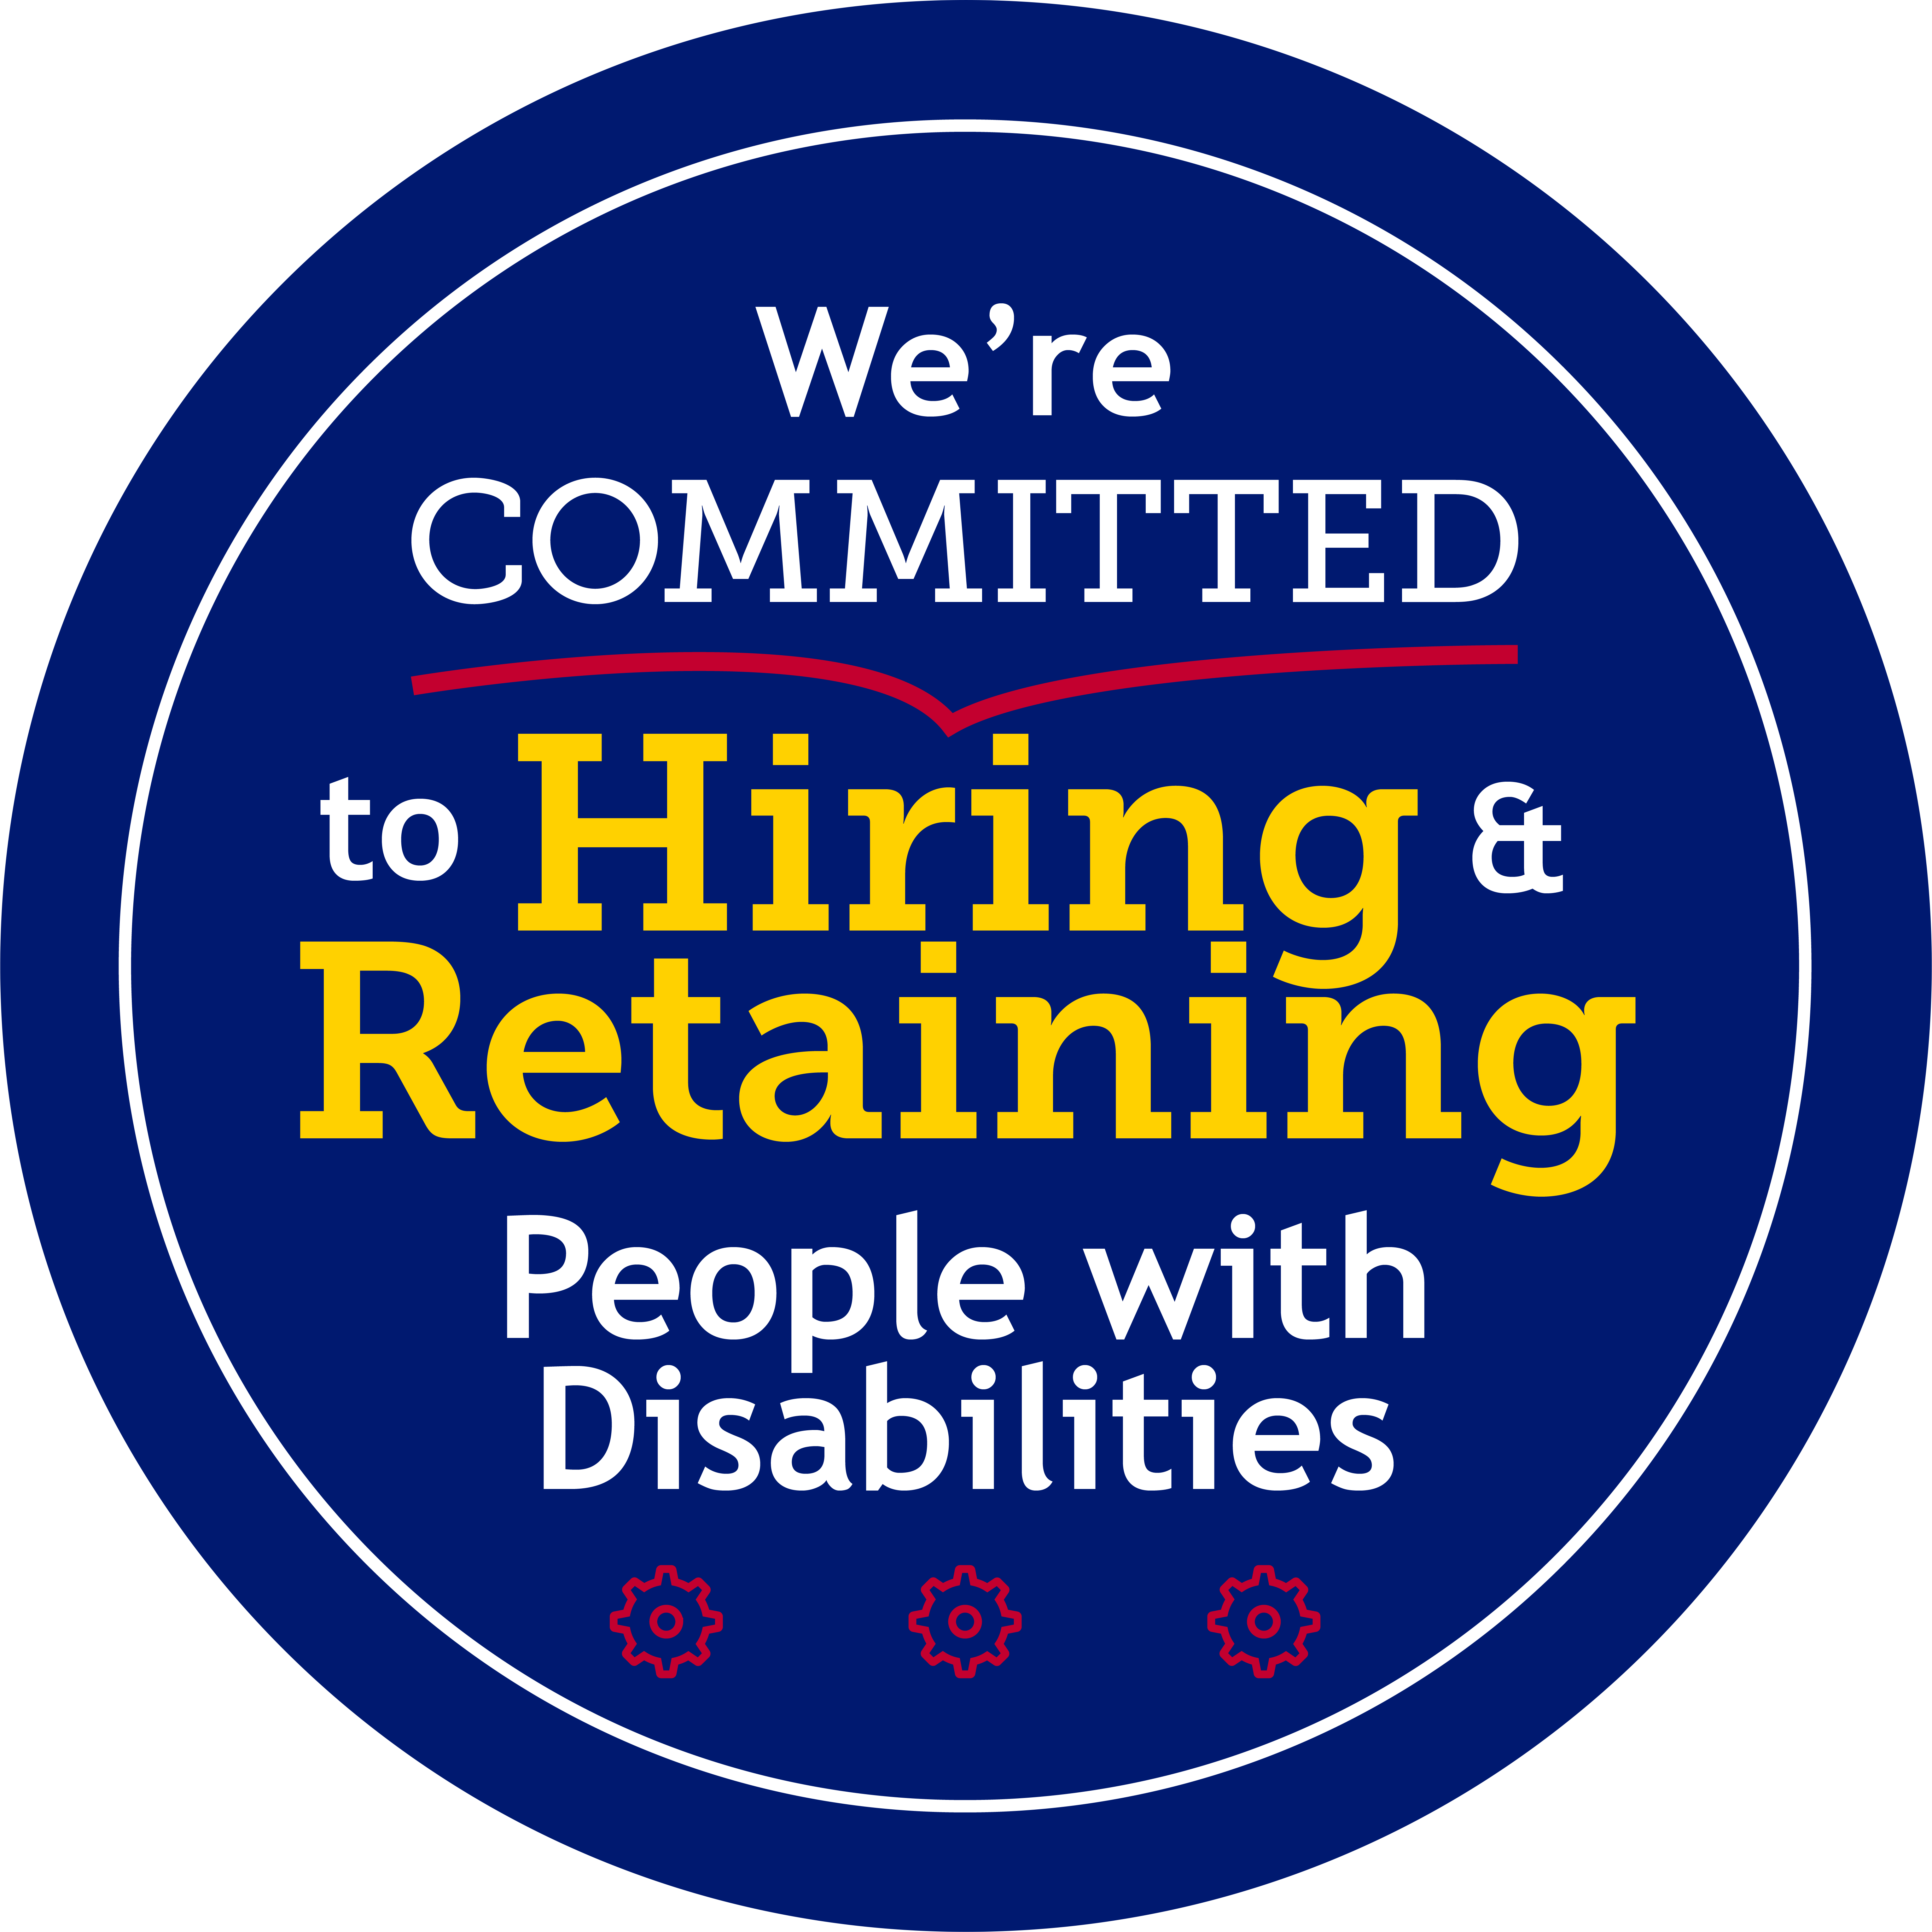 we're committed to hiring and retaining people with disabilities